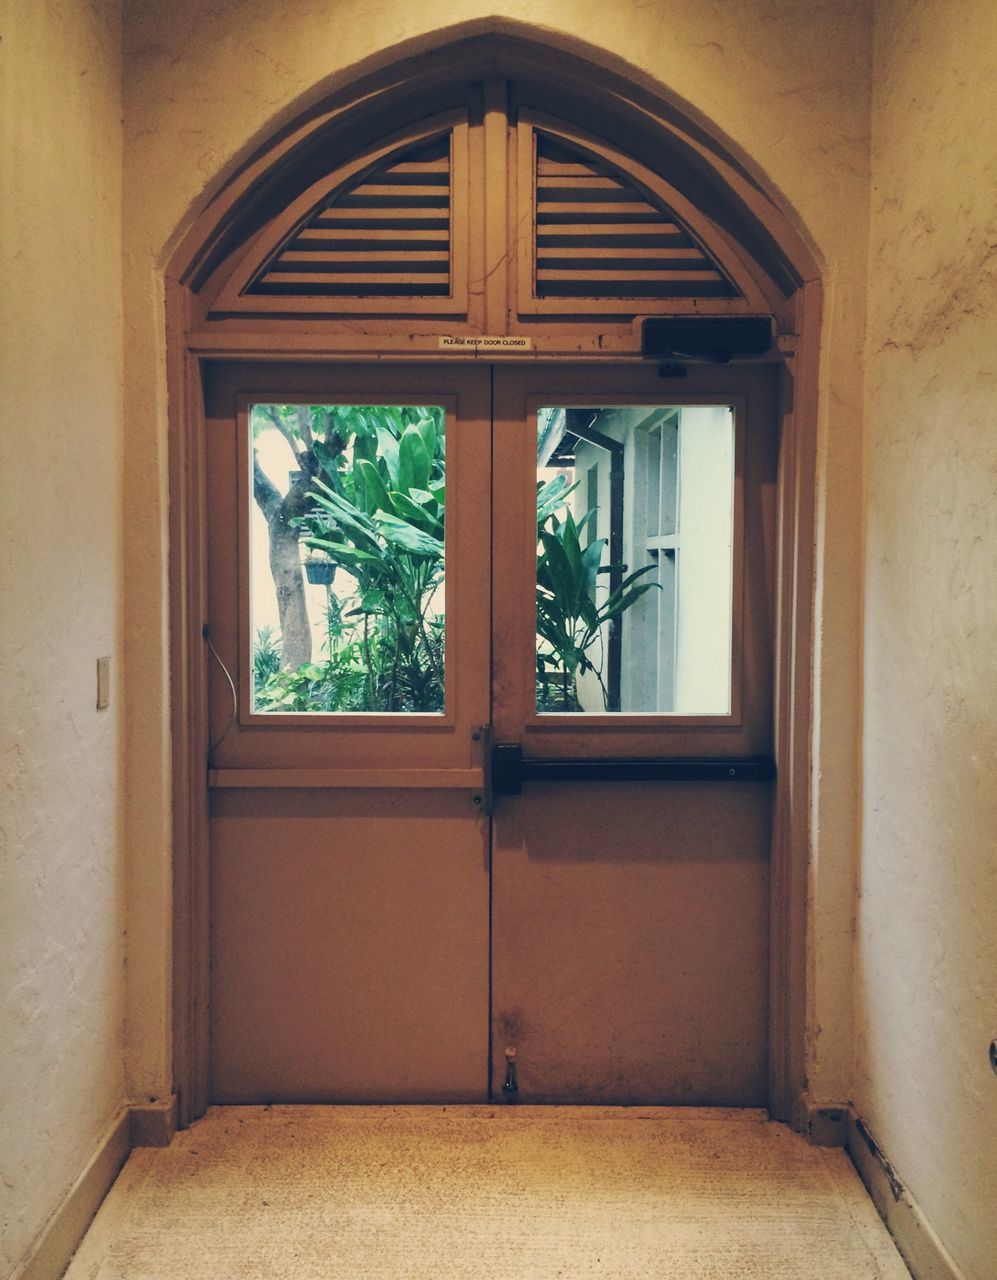 window, architecture, indoors, door, built structure, arch, house, closed, glass - material, entrance, open, building exterior, transparent, day, tree, potted plant, plant, no people, doorway, window sill